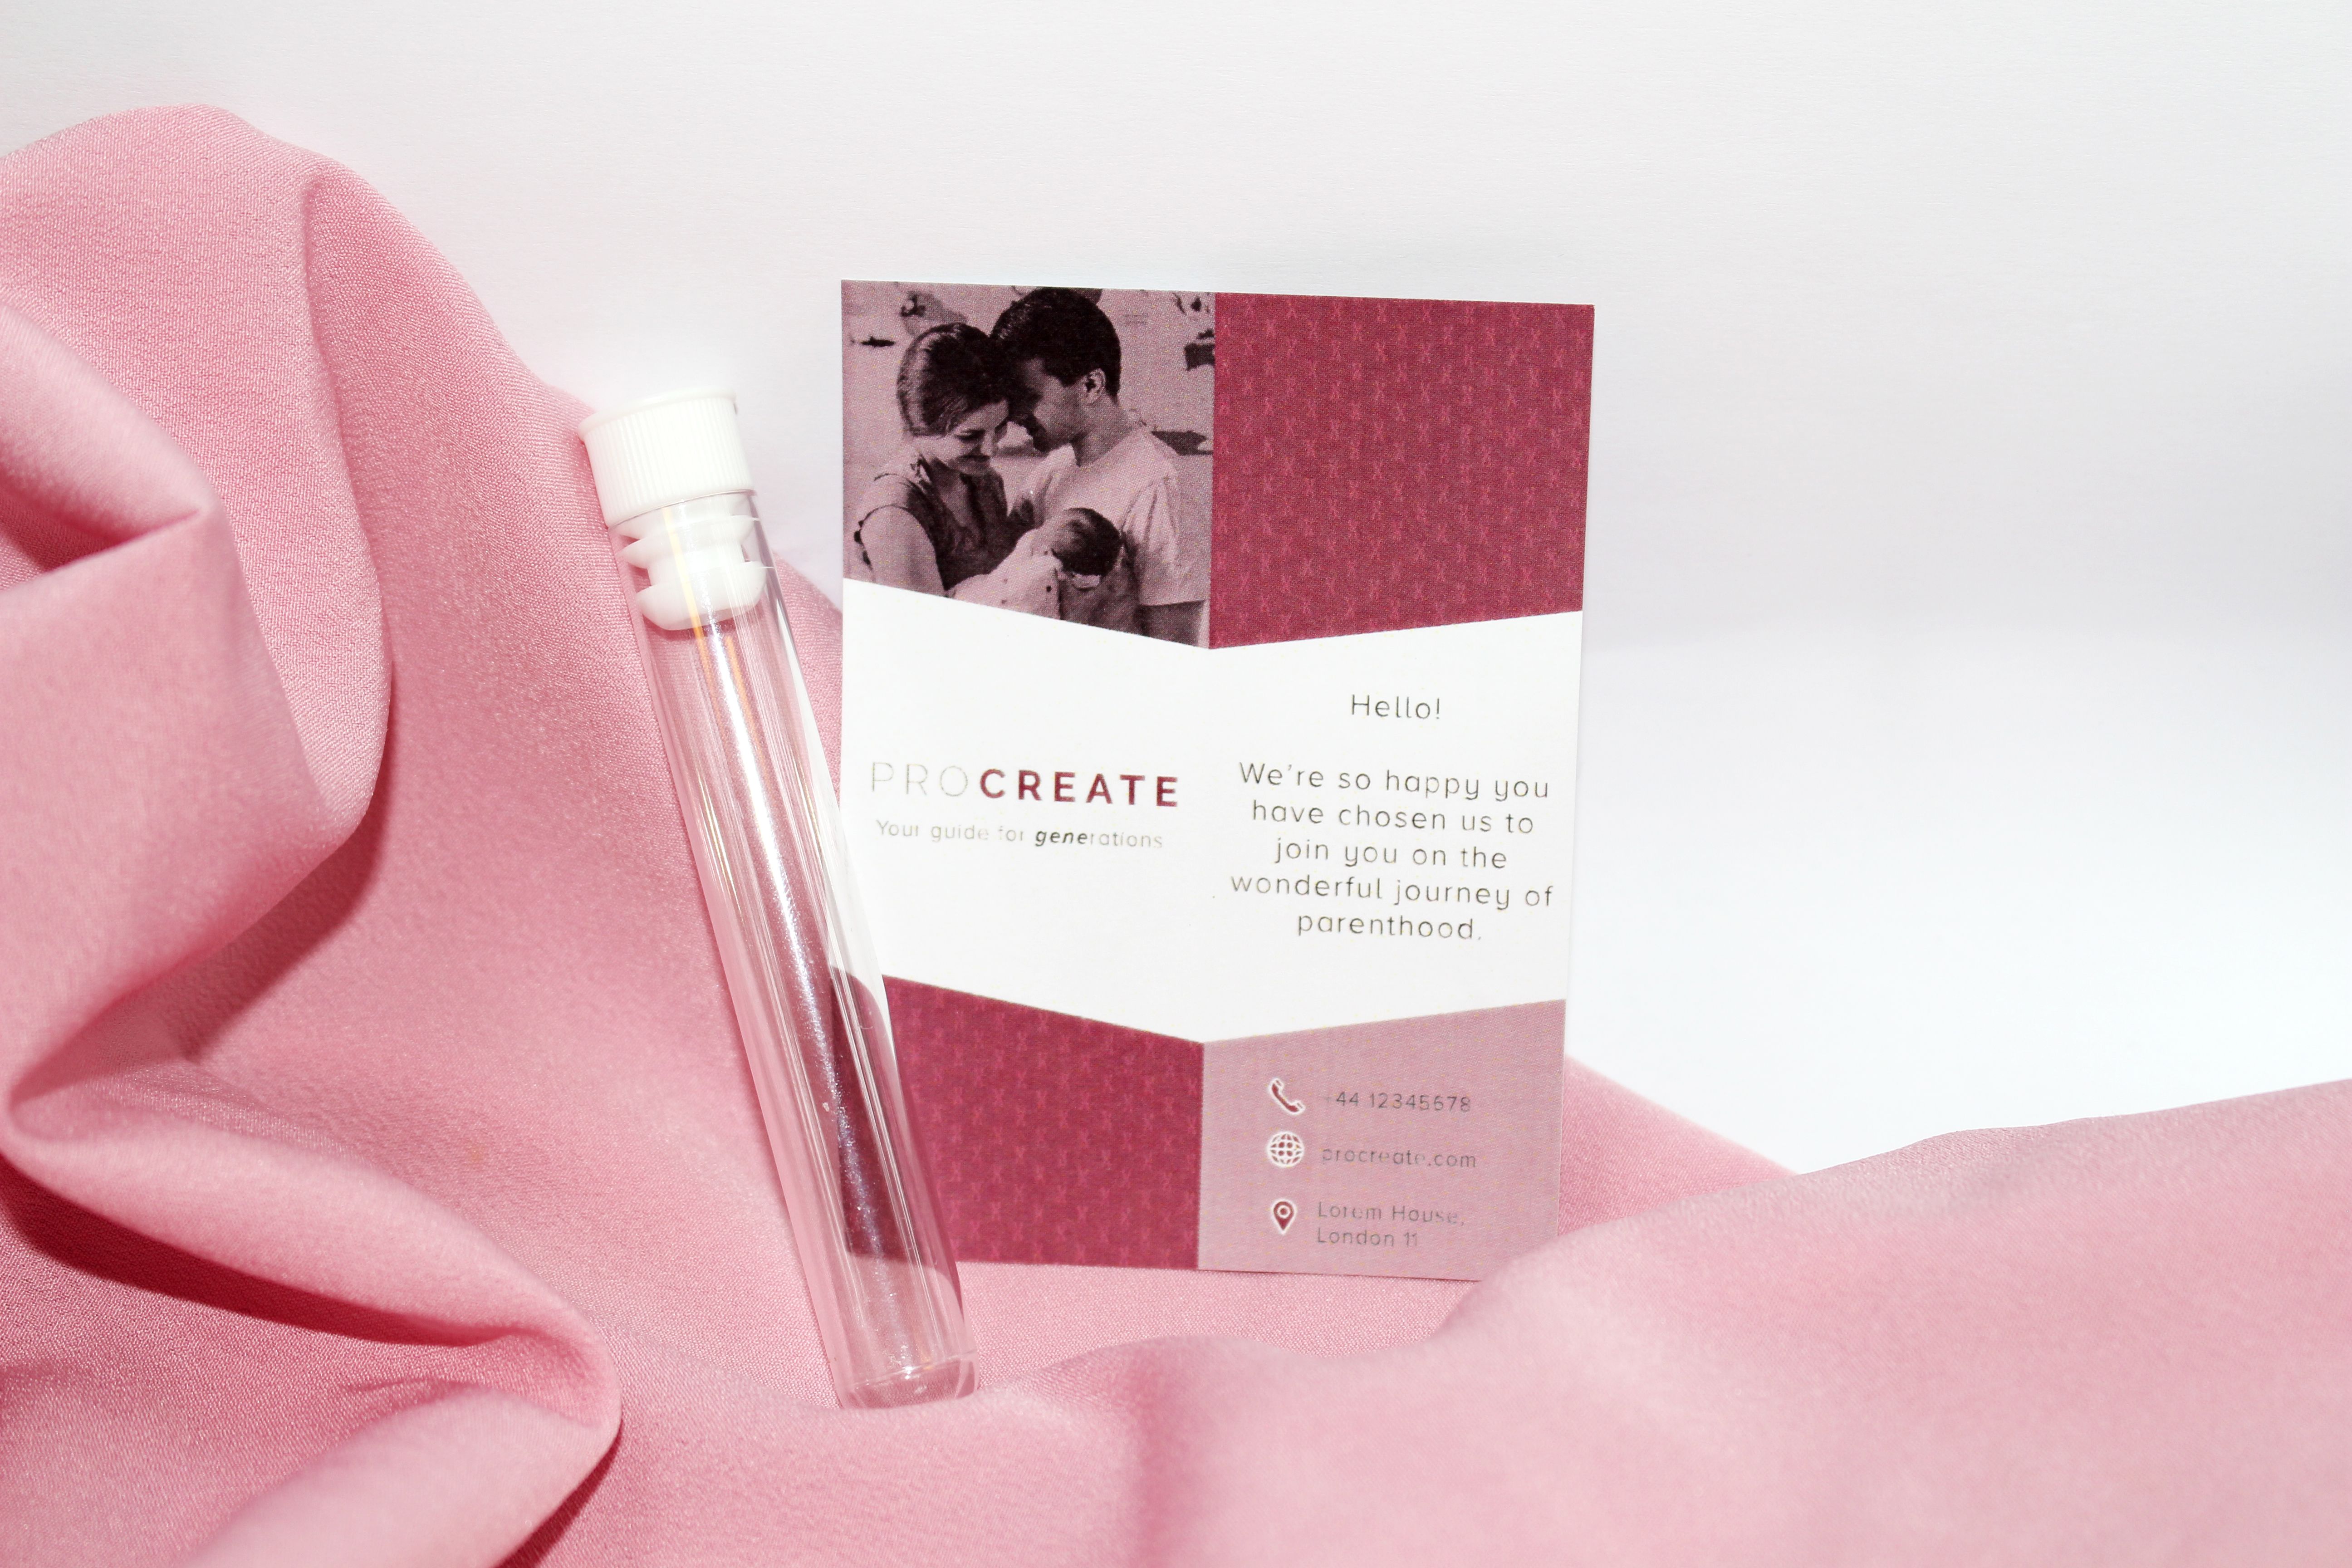 A leaflet about parenthood next to a test tube ontop of a pink satin sheet